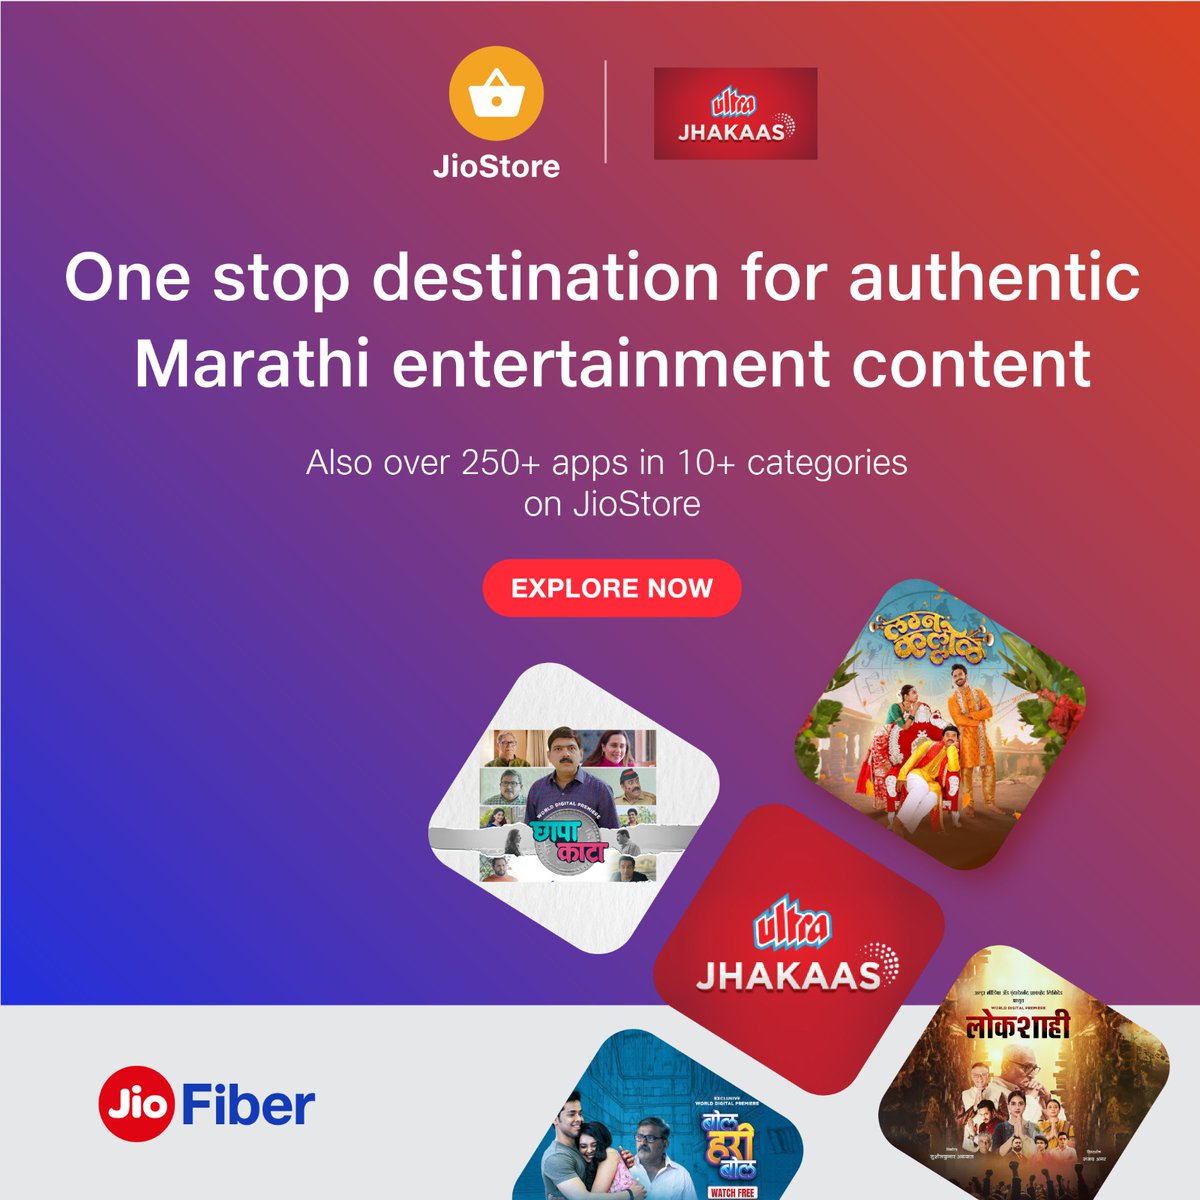 Check out today & enjoy amazing Entertainment App on JioStore via your JioFiber plans.

@ultrajhakaas destination for 100% Marathi entertainment, with 2000 hours of exclusive content.

#Jio #JioDevelopers #JioStore #UltraJhakaas #SolveForBillions #BuildforBharat